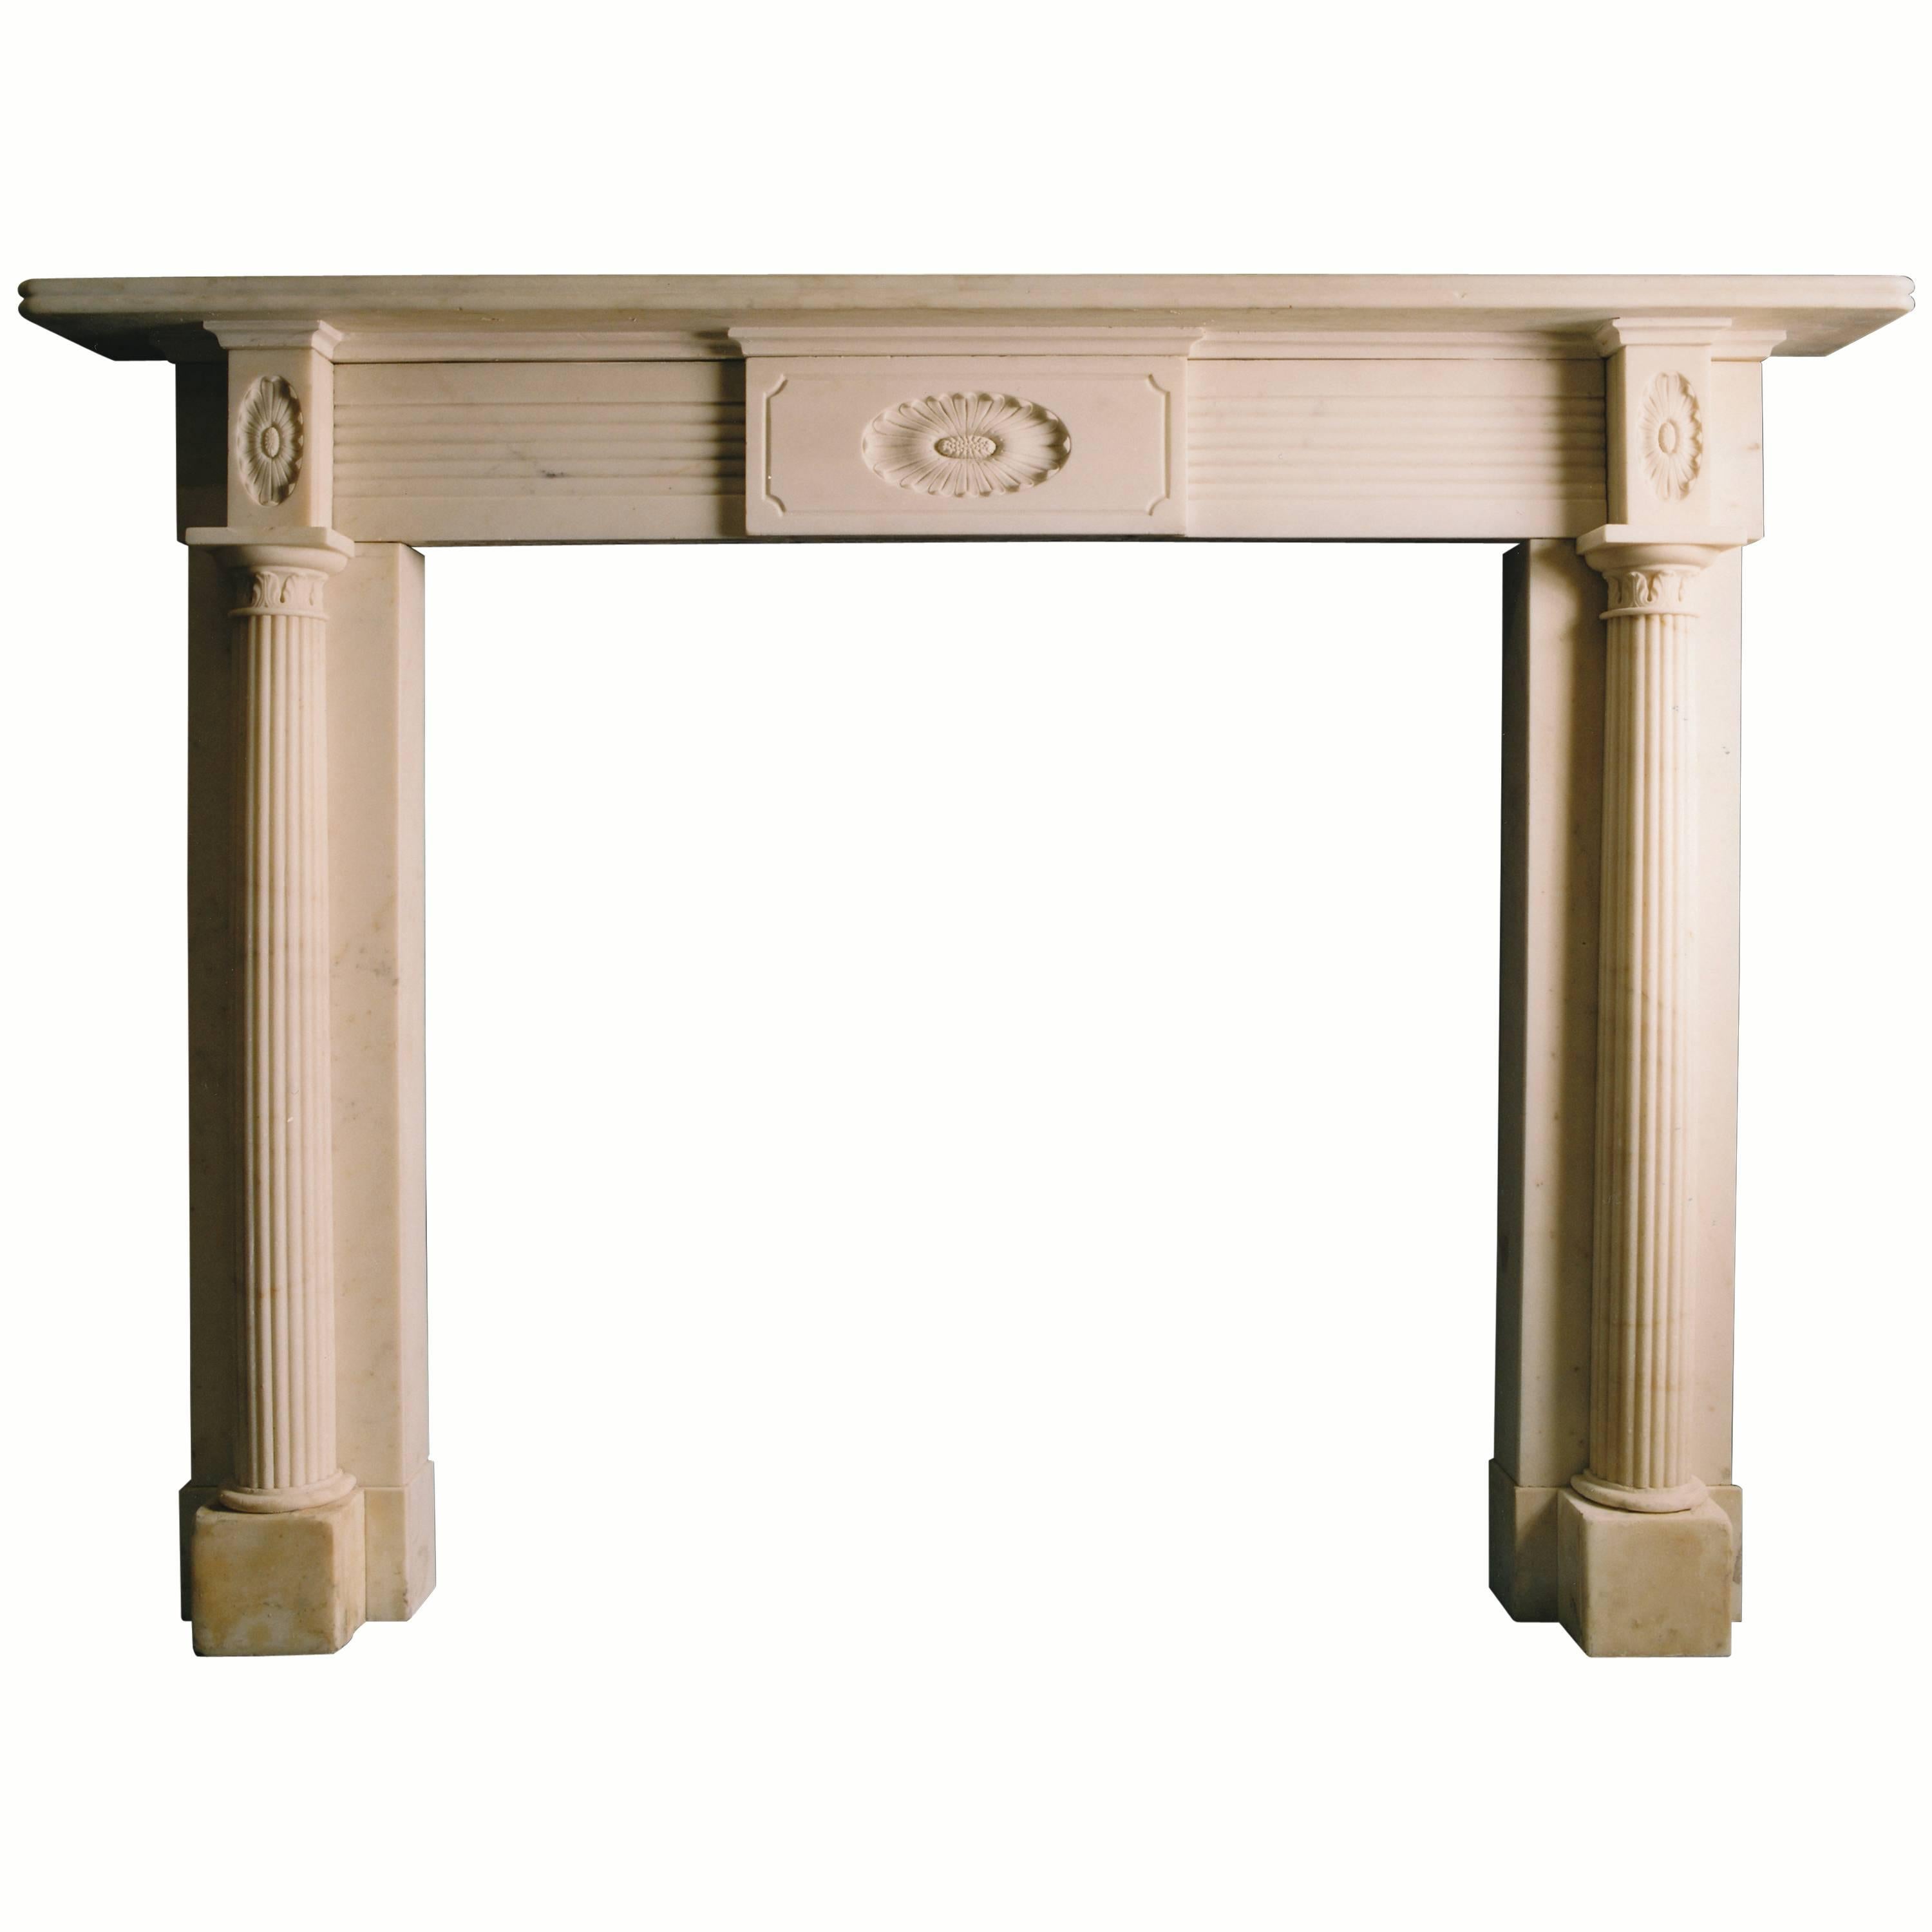 19th Century Scottish Mantel Reproduction in Statuary Marble 